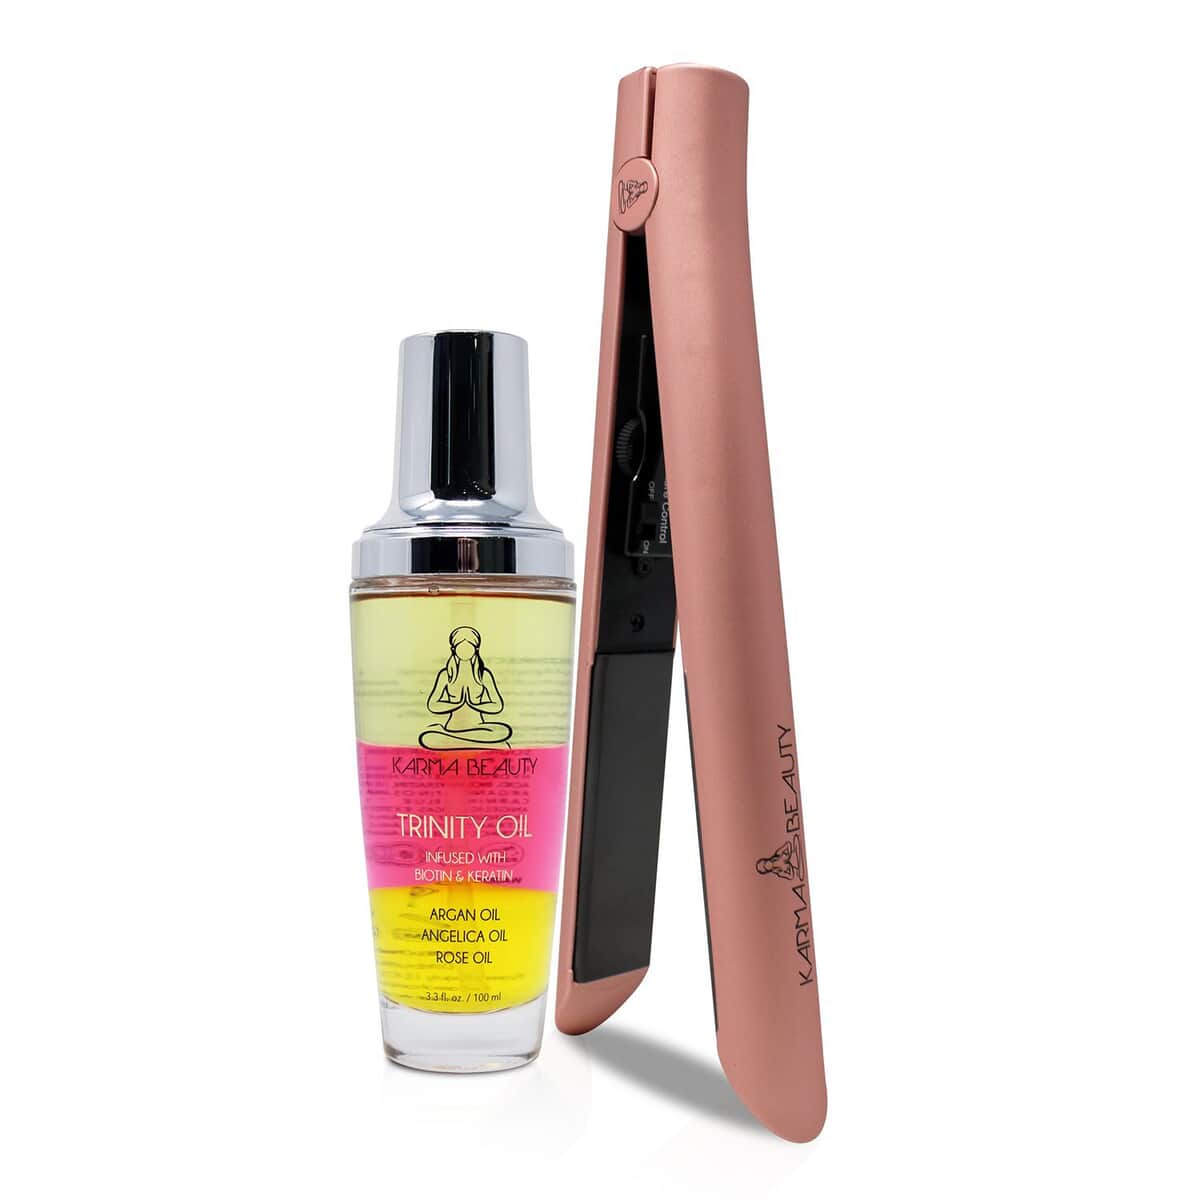 Buy Karma Beauty- Rose Gold Travel Kit: Includes Mini Flat Iron, Curler and  Straightening Brush at ShopLC.